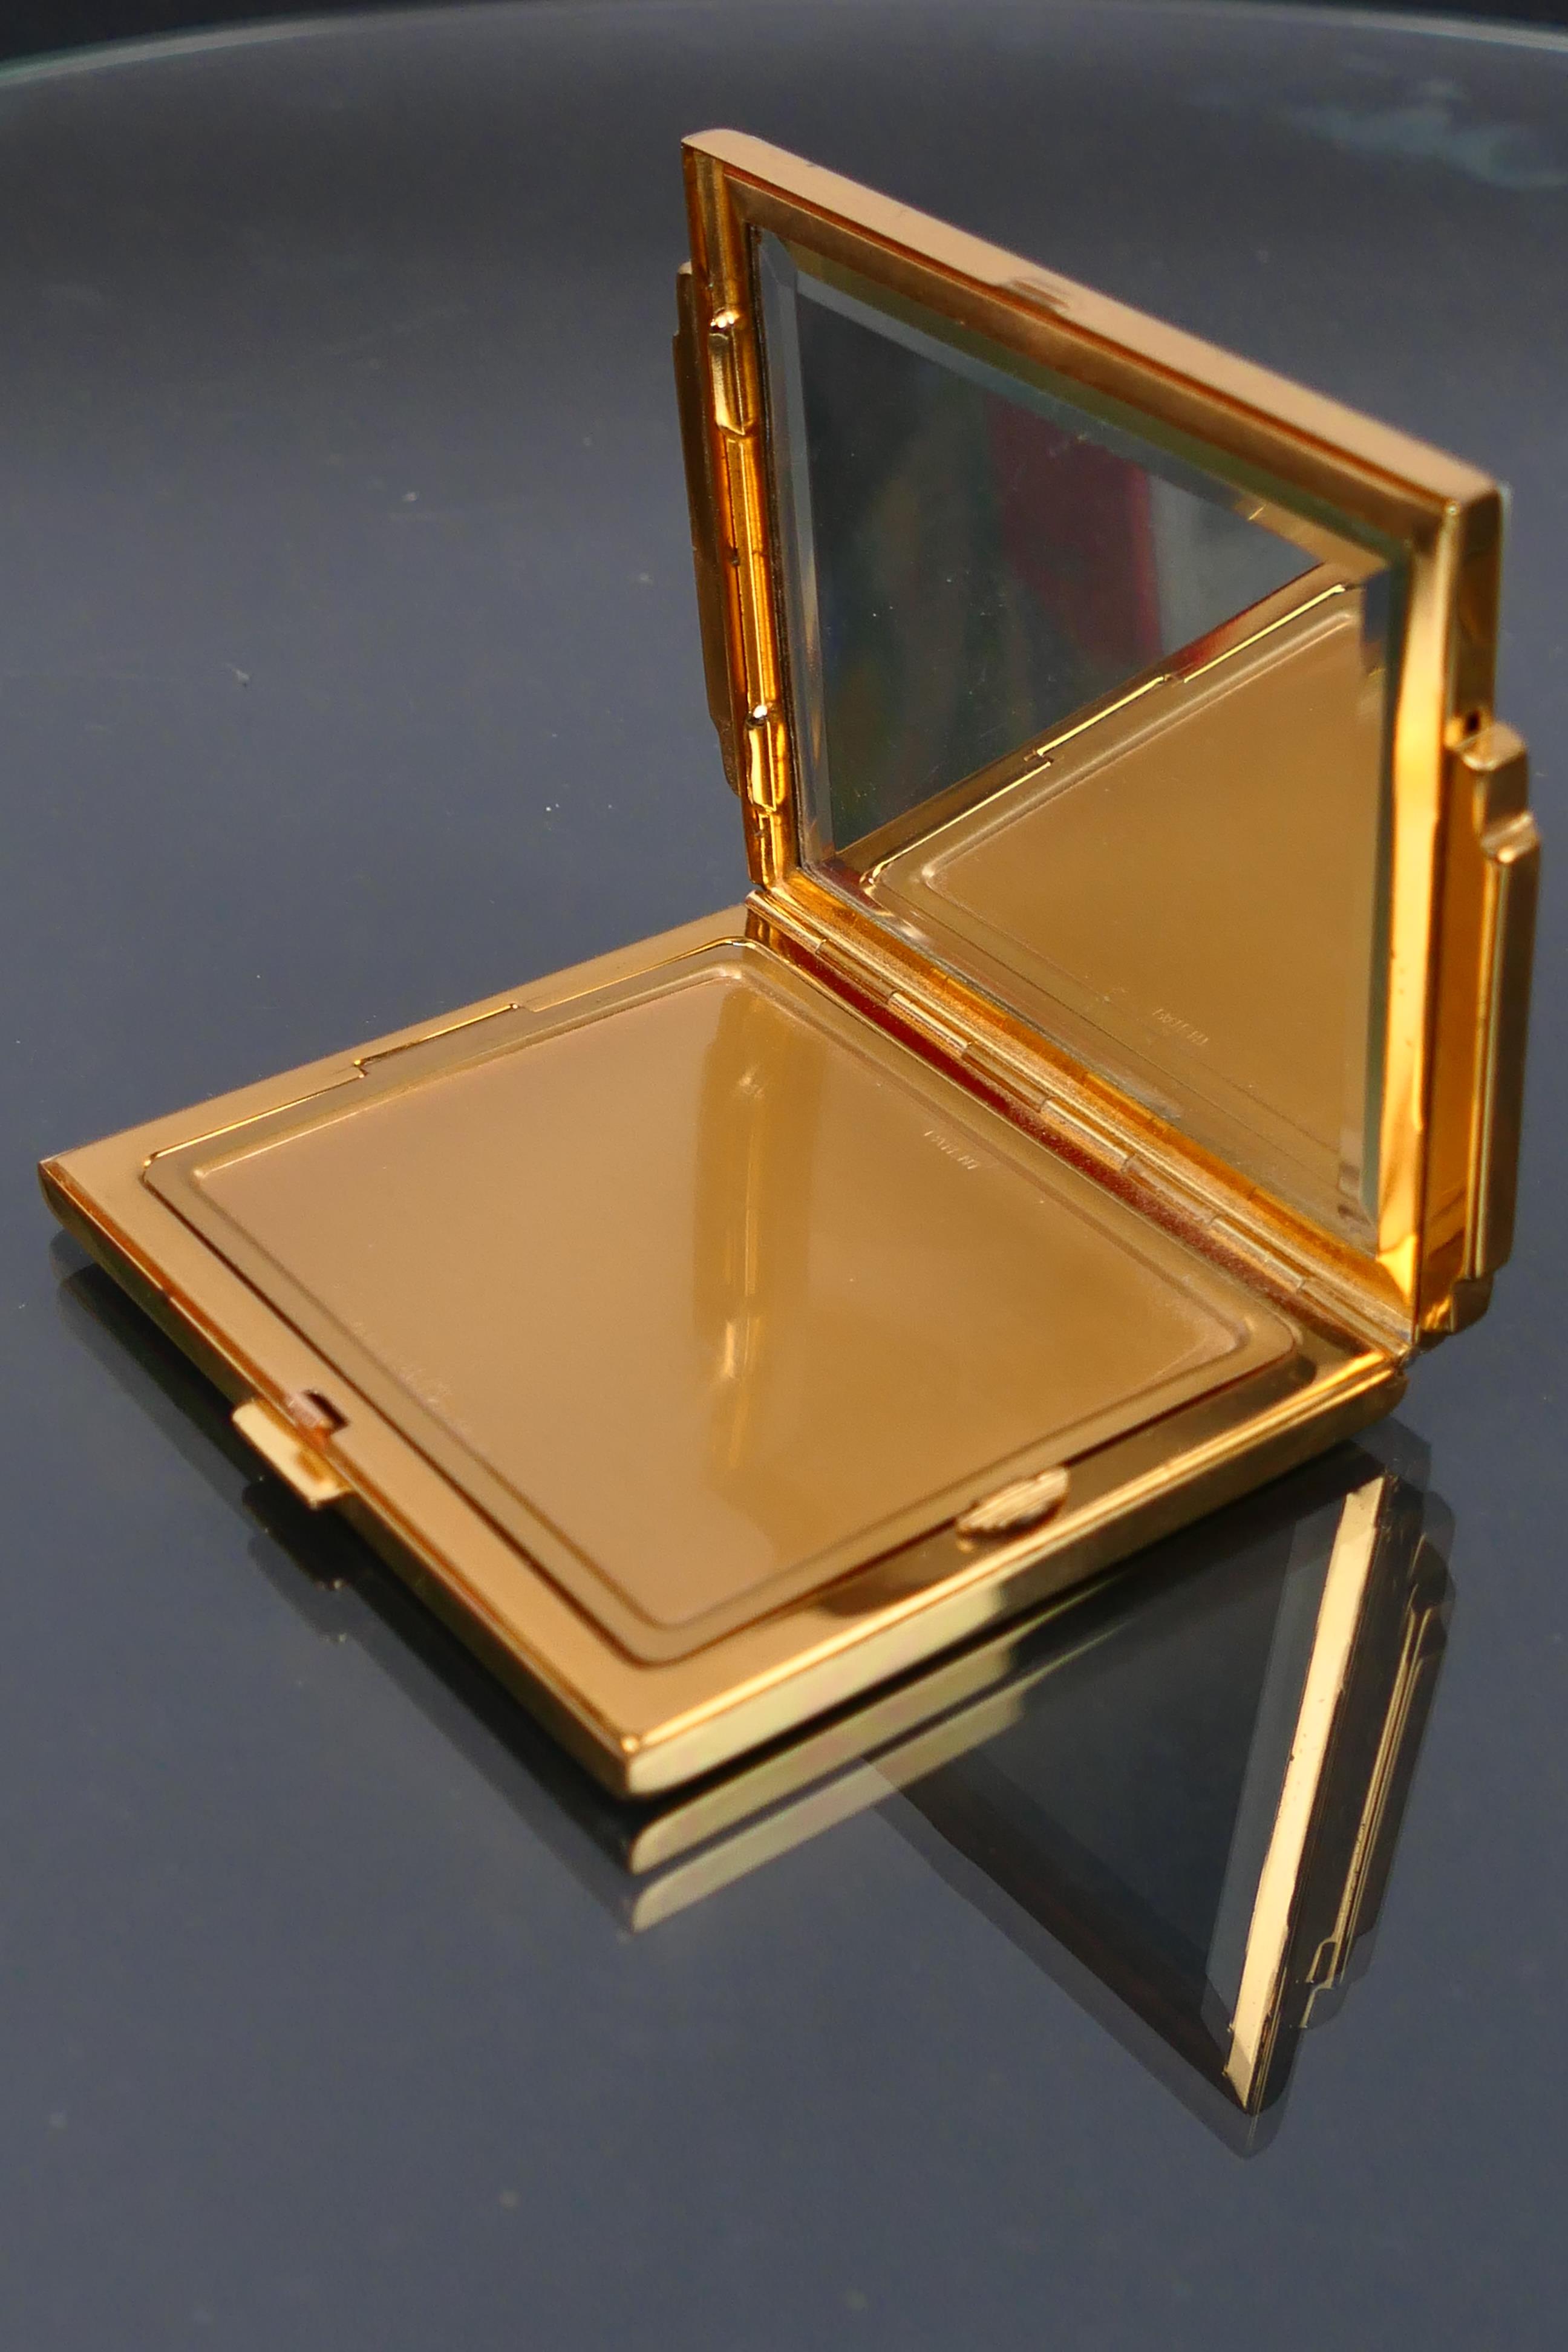 AGME - A mother of pearl faced art deco style powder compact. - Image 8 of 9